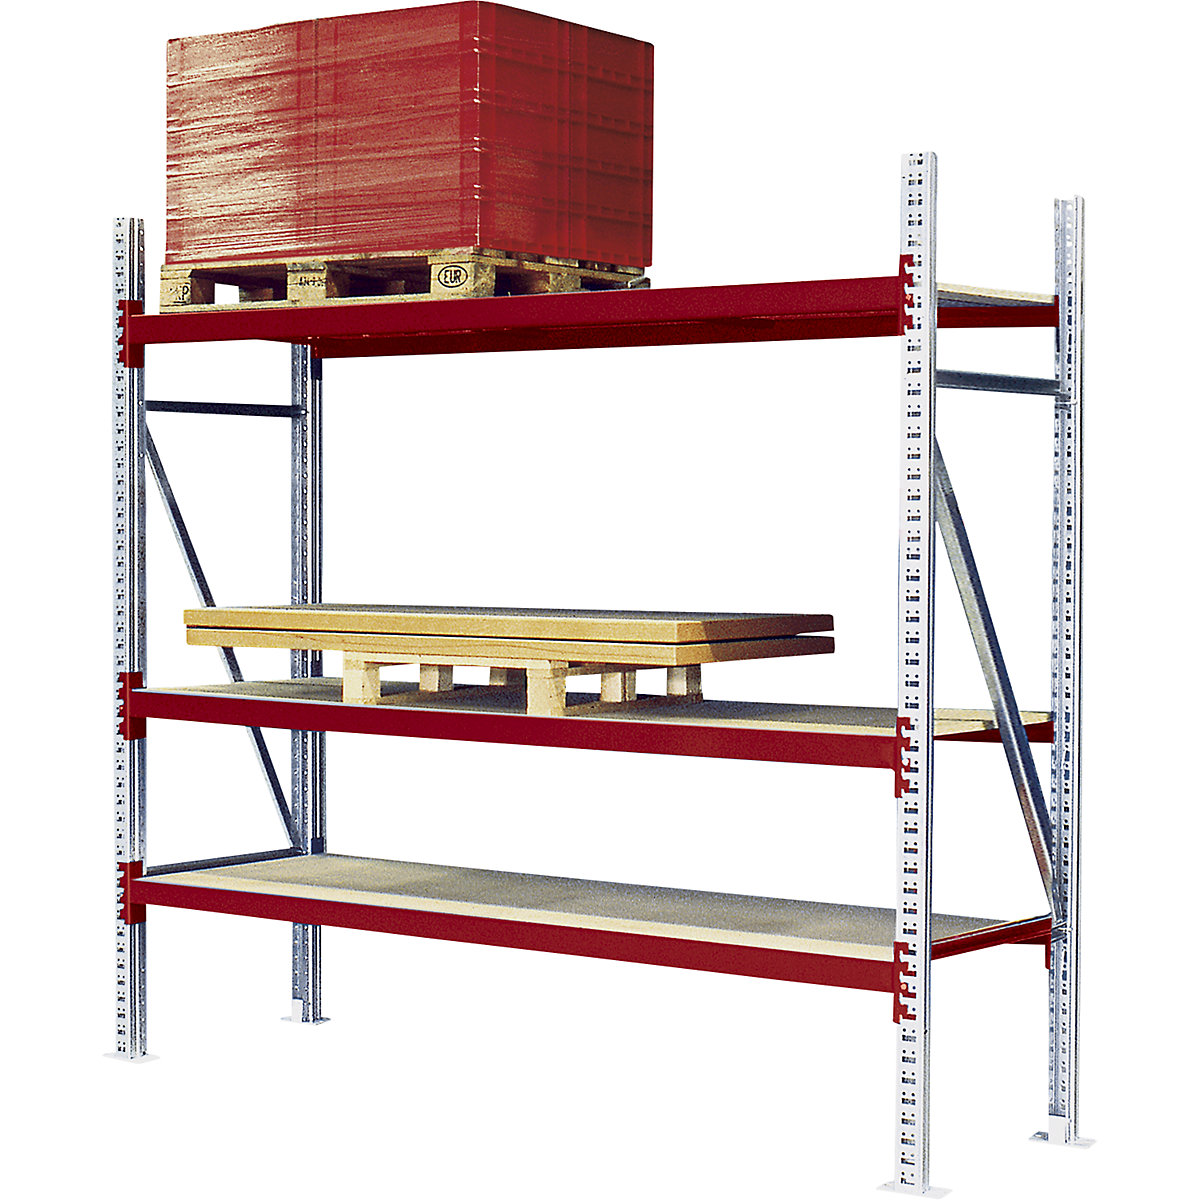 Rayonnage extra-large grande capacité – eurokraft pro, charge max. / rayonnage 4000 kg, h x l x p 2000 x 2700 x 800 mm, rayonnage additionnel, rouge RAL 3000-7